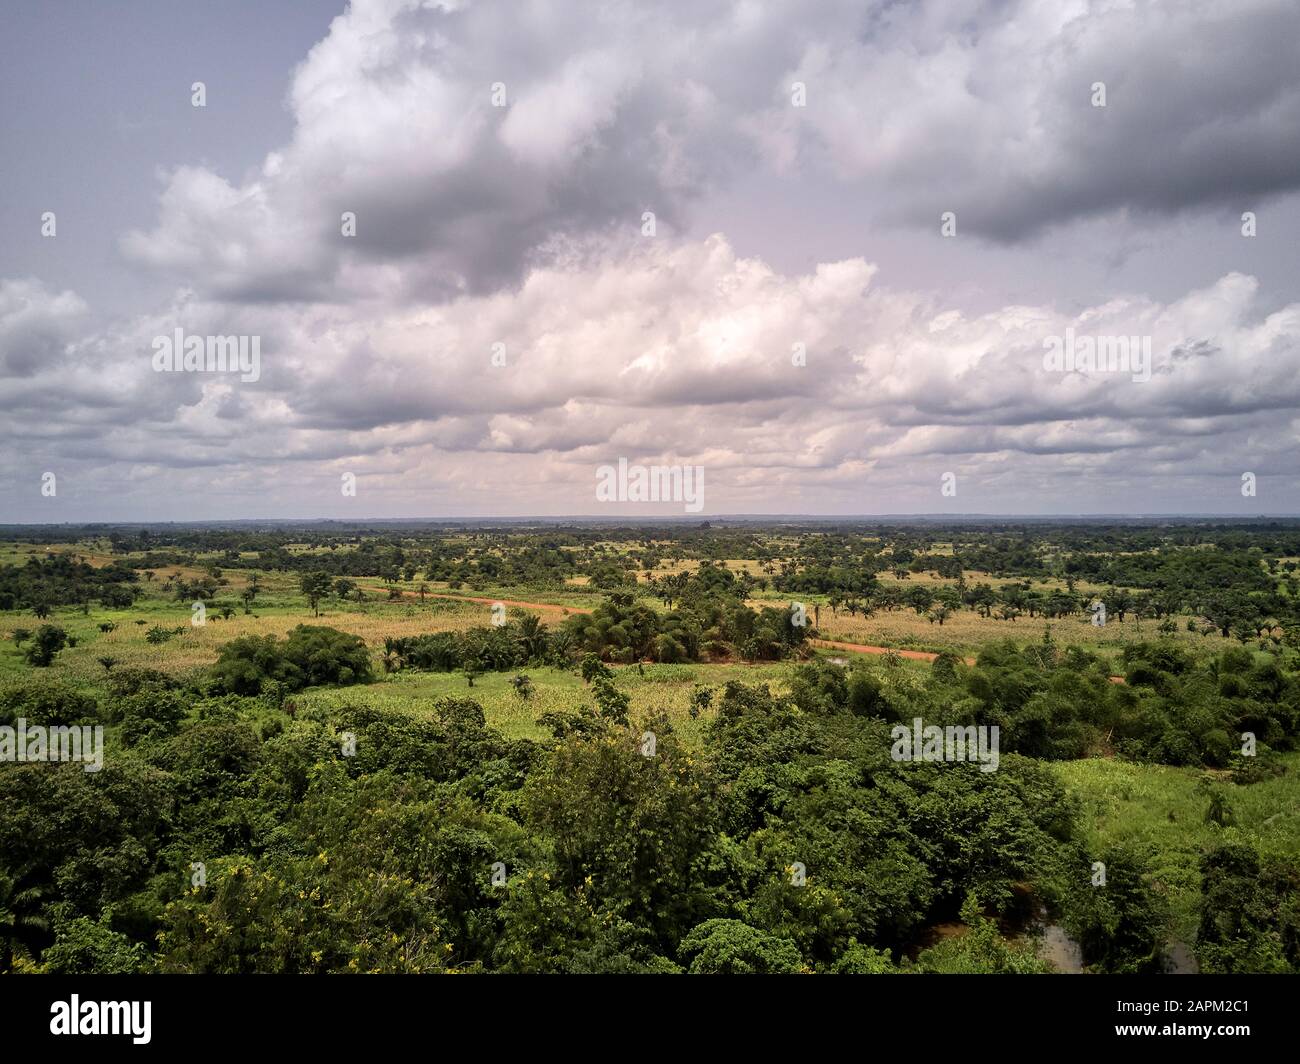 Benin, Large white clouds over green African landscape Stock Photo